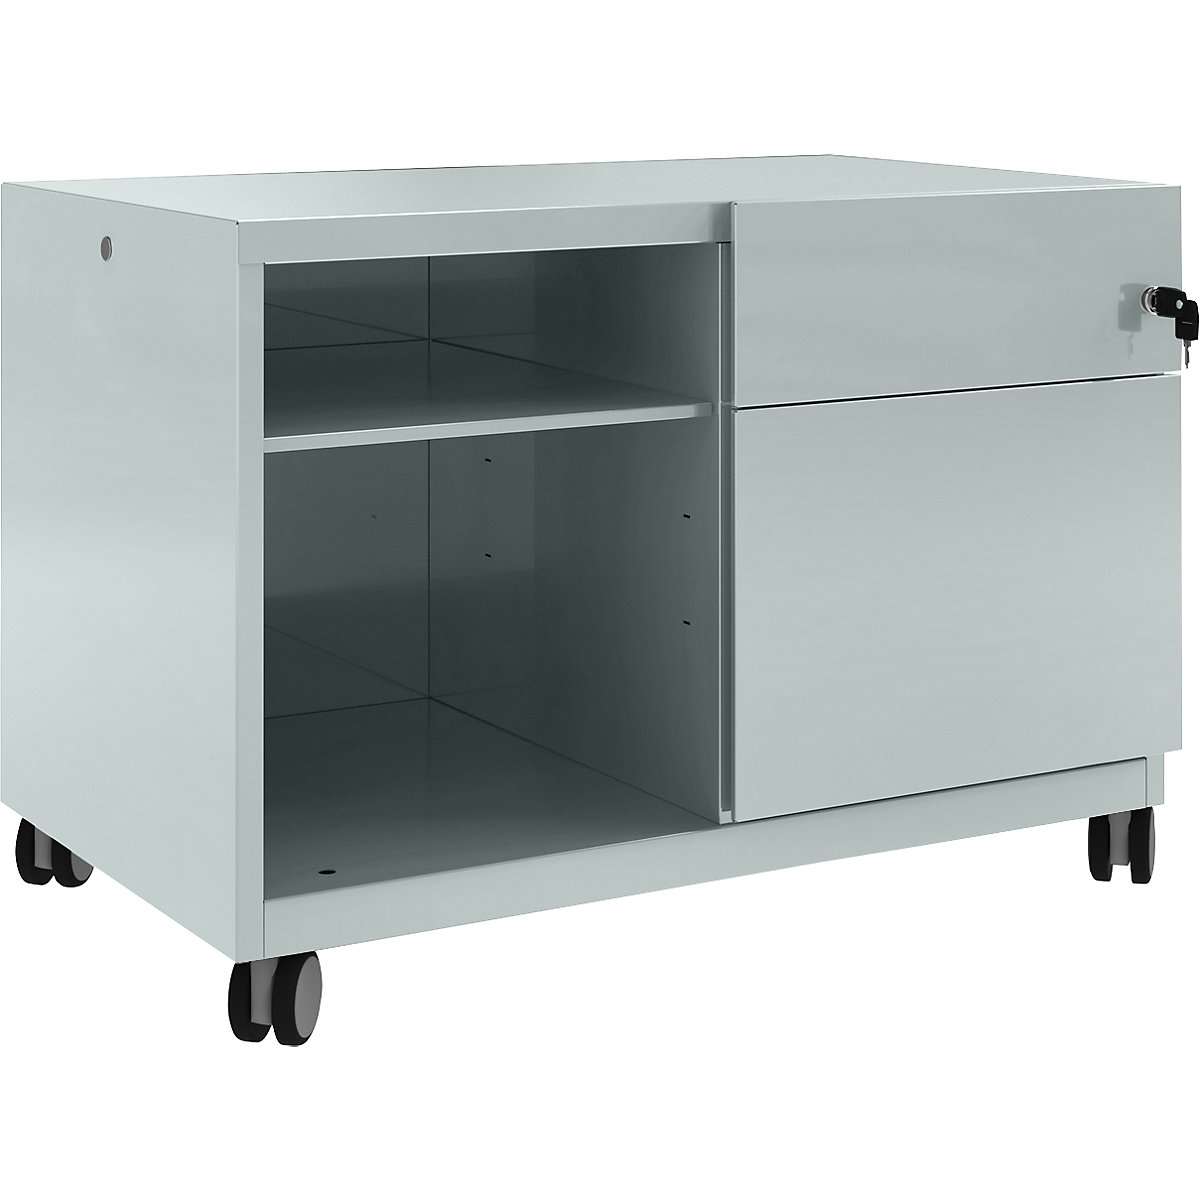 Note™ CADDY, AxLxP 563 x 800 x 490 mm - BISLEY